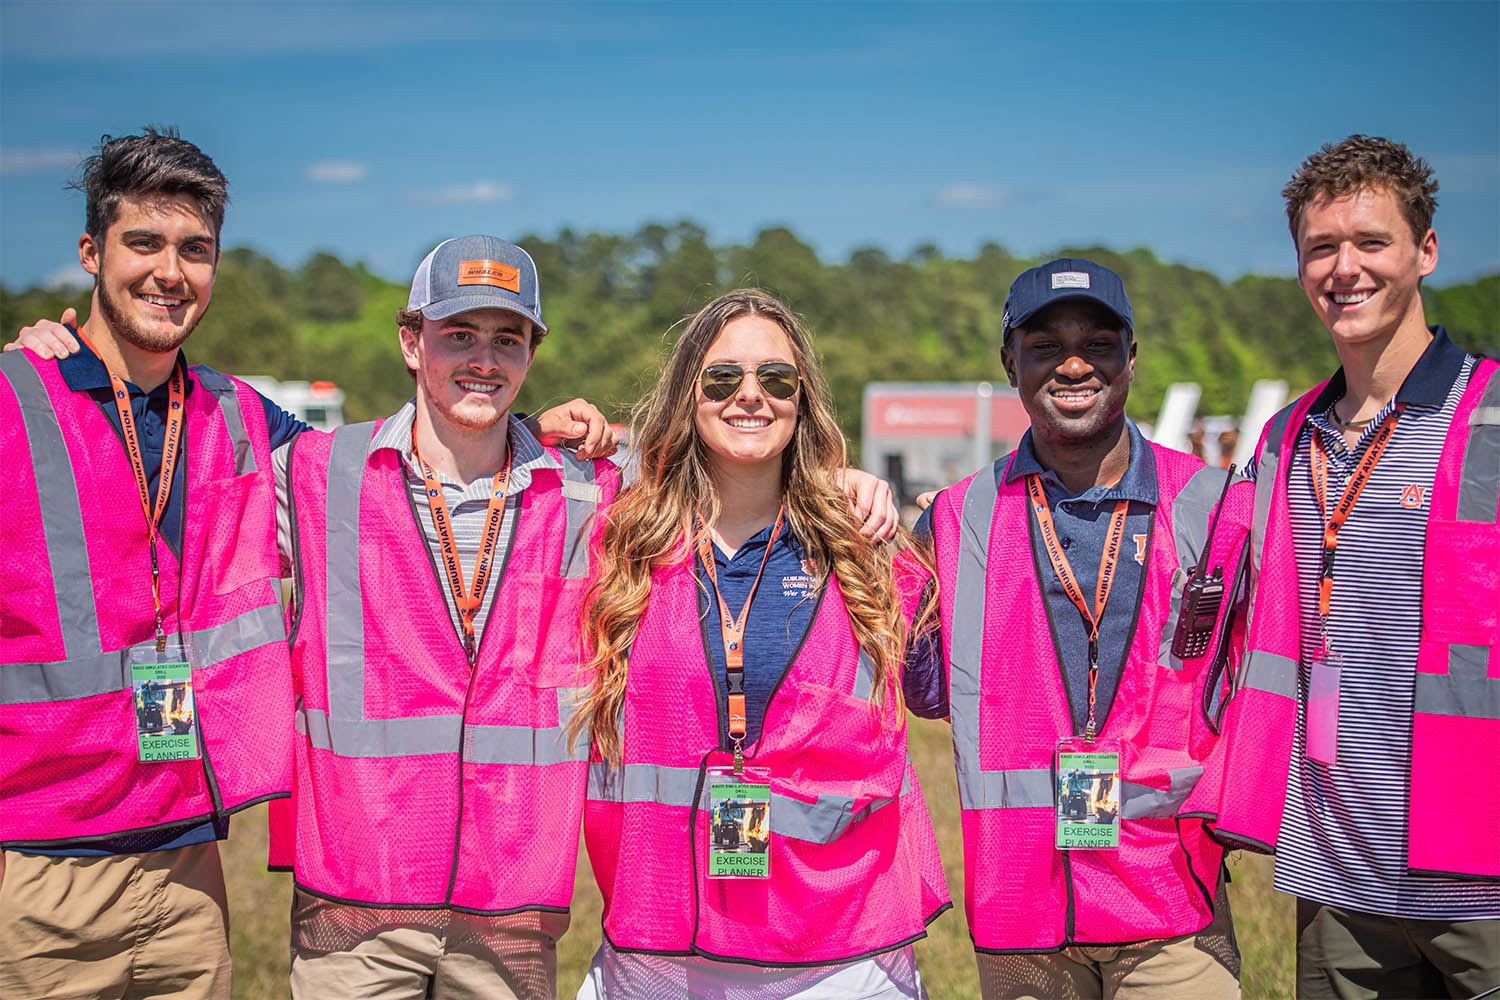 Auburn aviation students posing for picture wearing bright pink vests